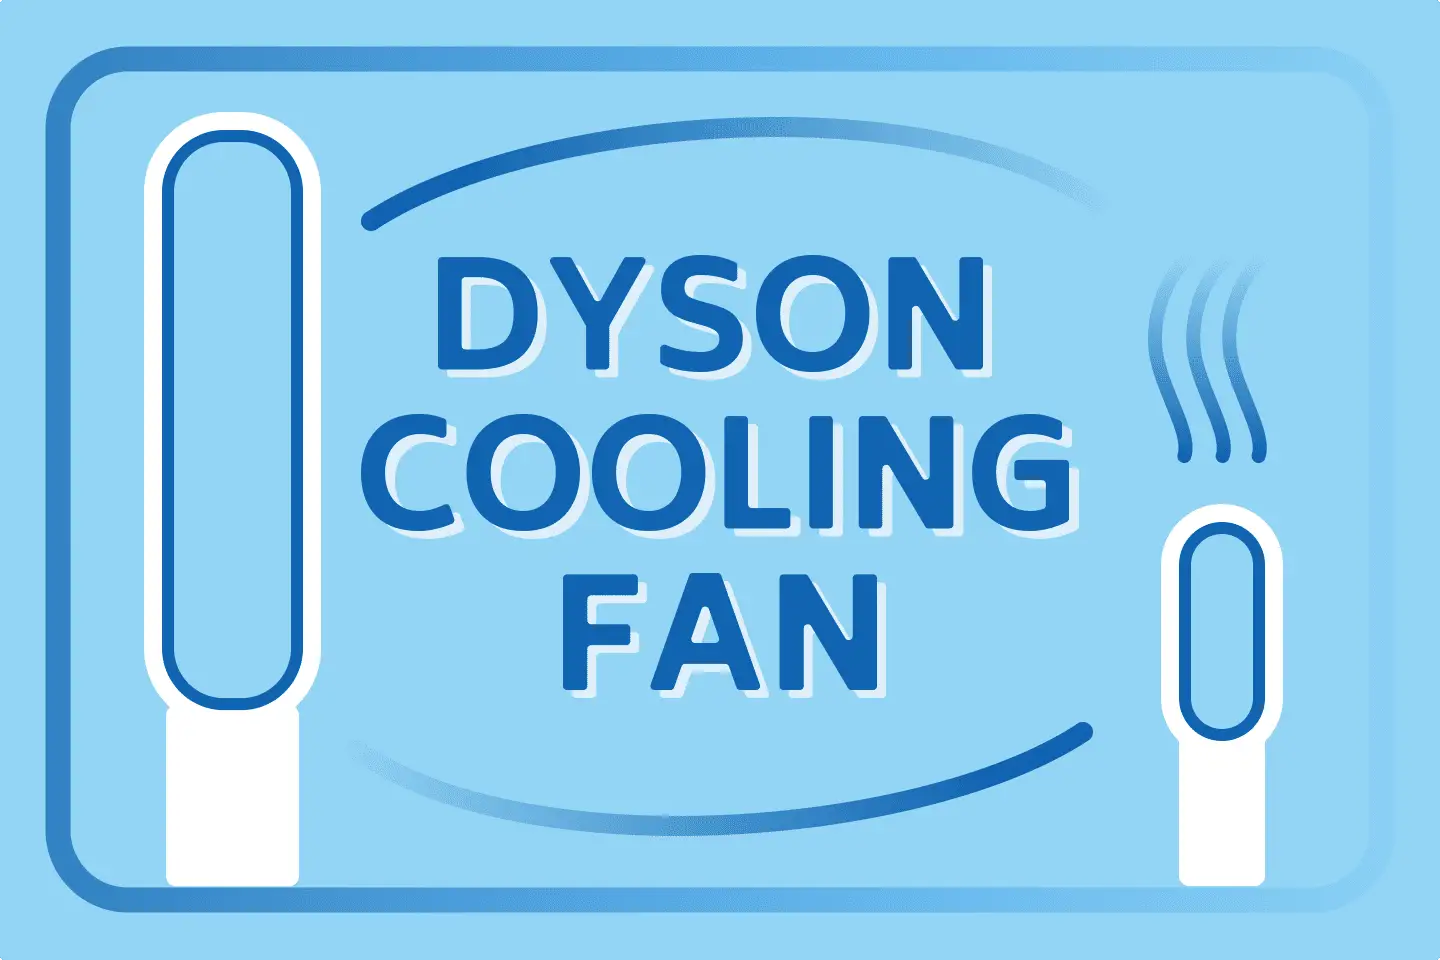 Best Dyson Cooling Fan: Reviewed by Experts